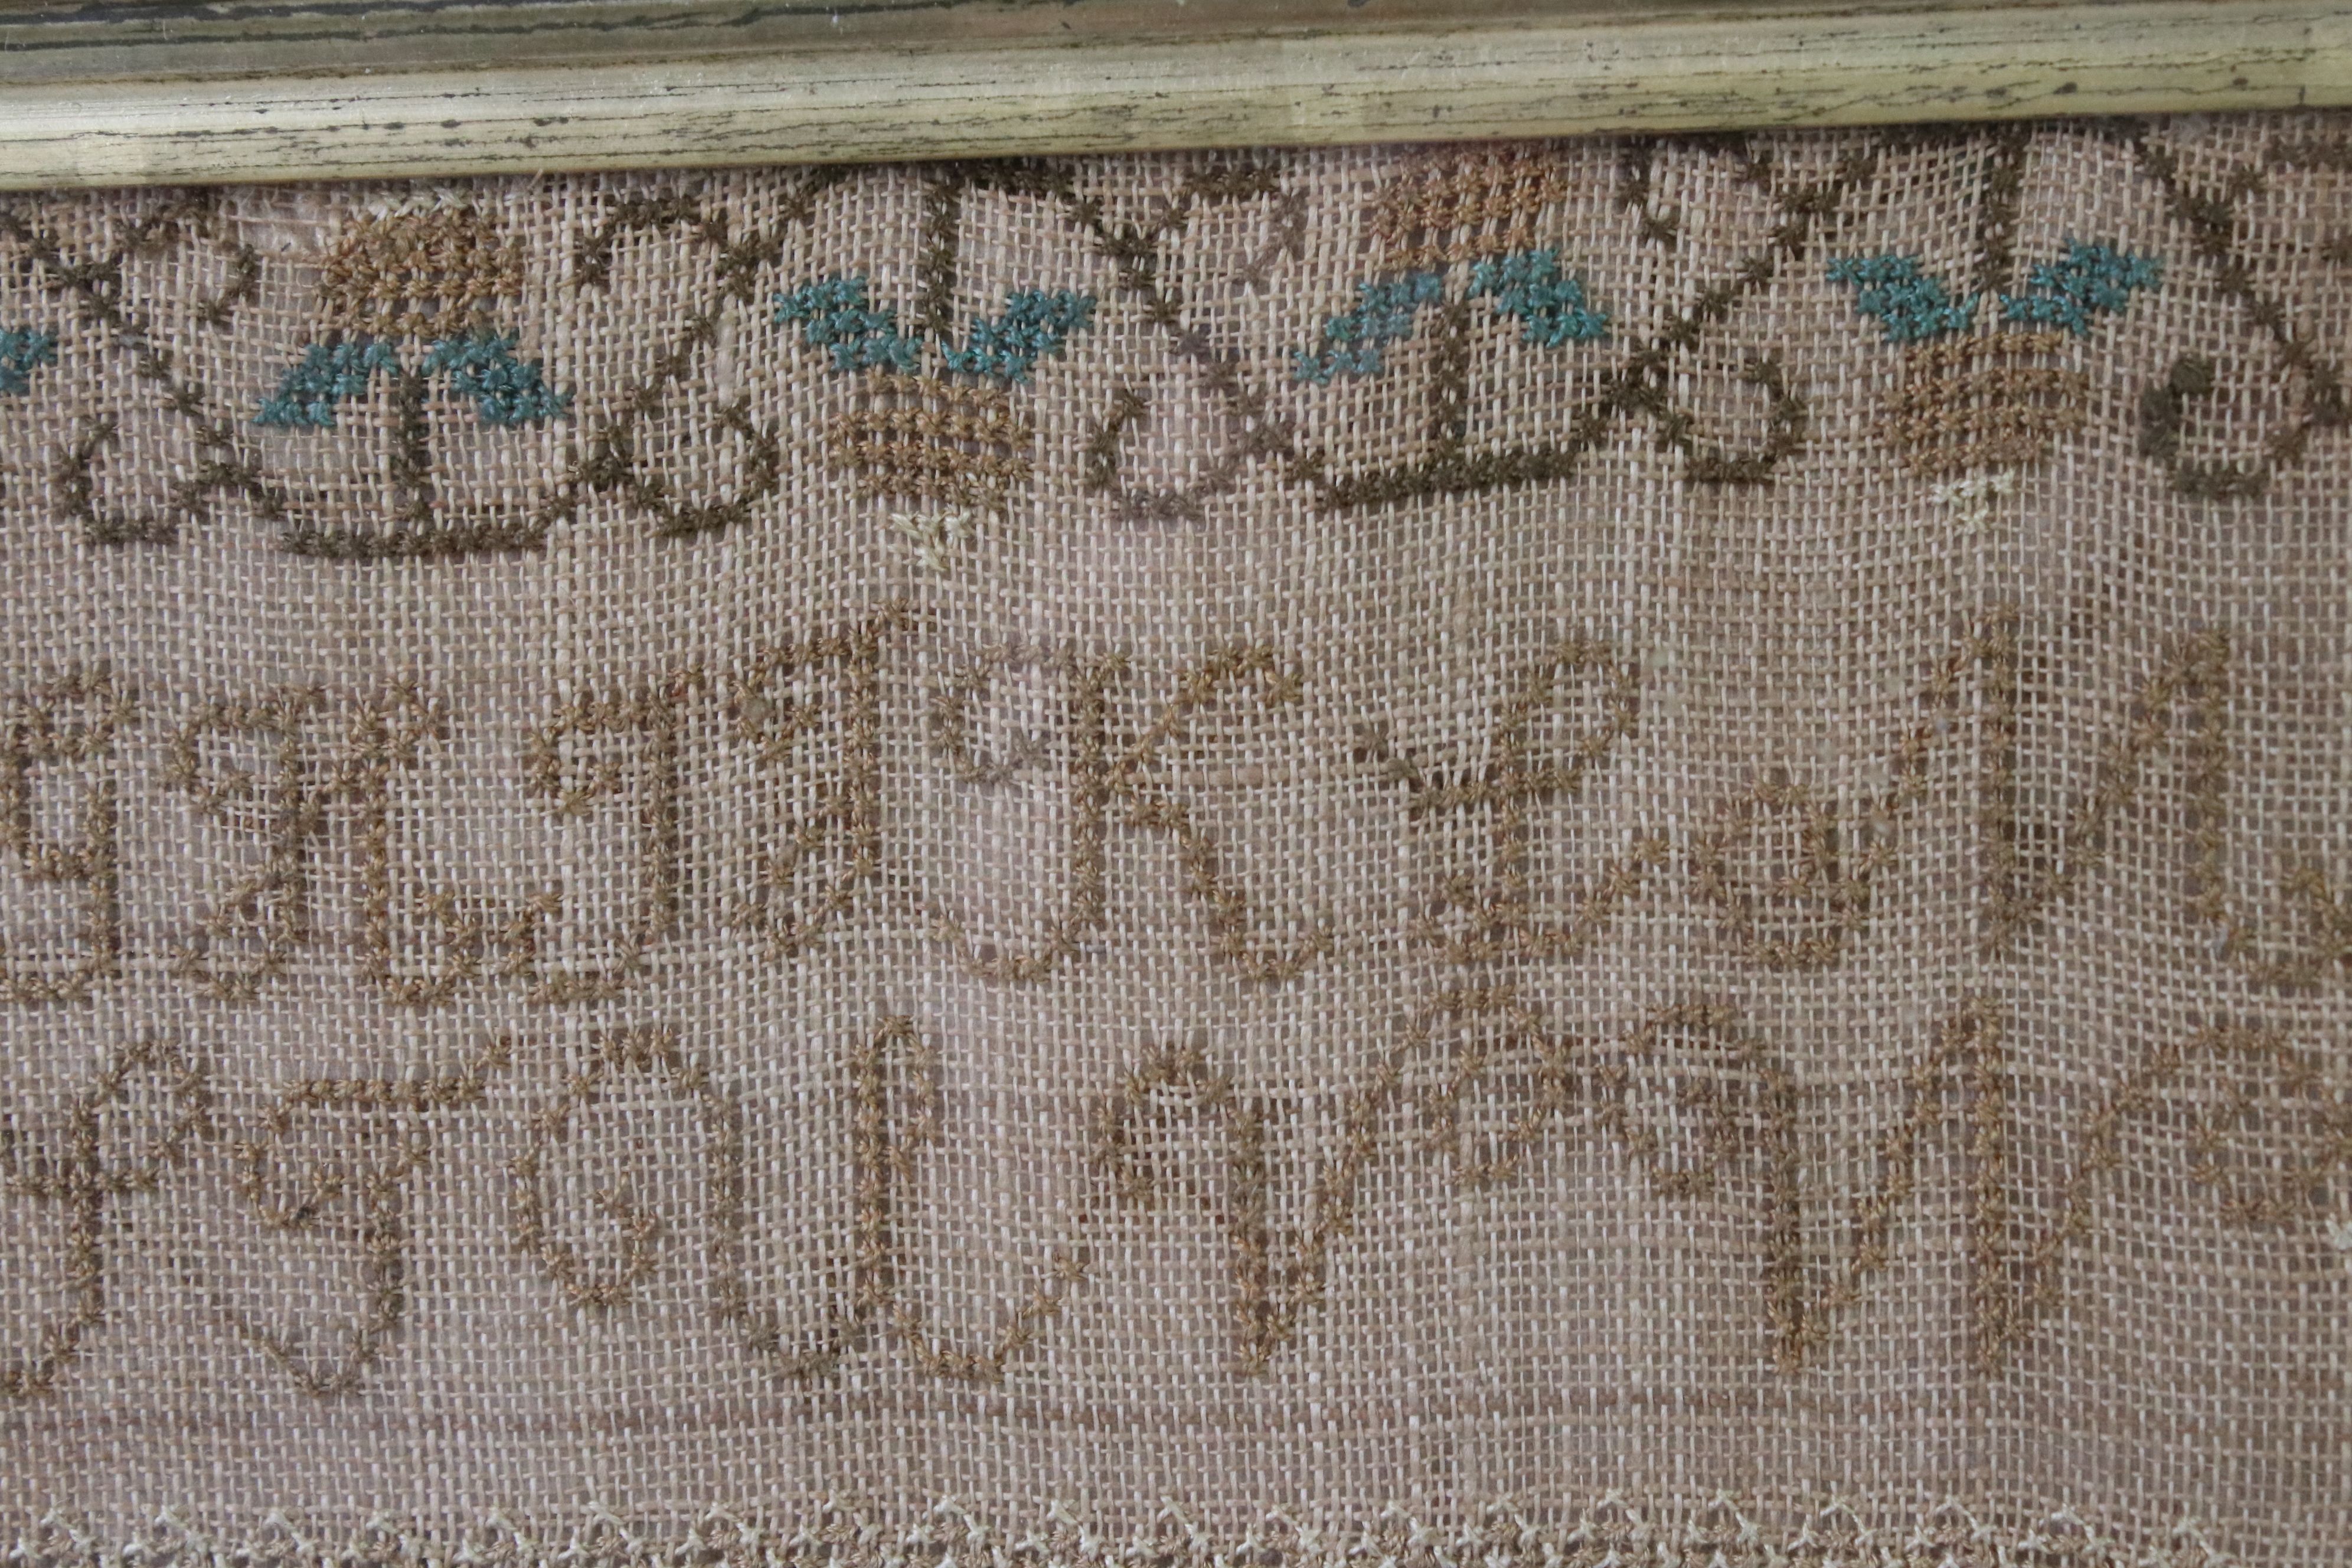 Early 19th century needlework sampler by Mary Bank, dated June 16th 1826, featuring a house, - Image 6 of 7